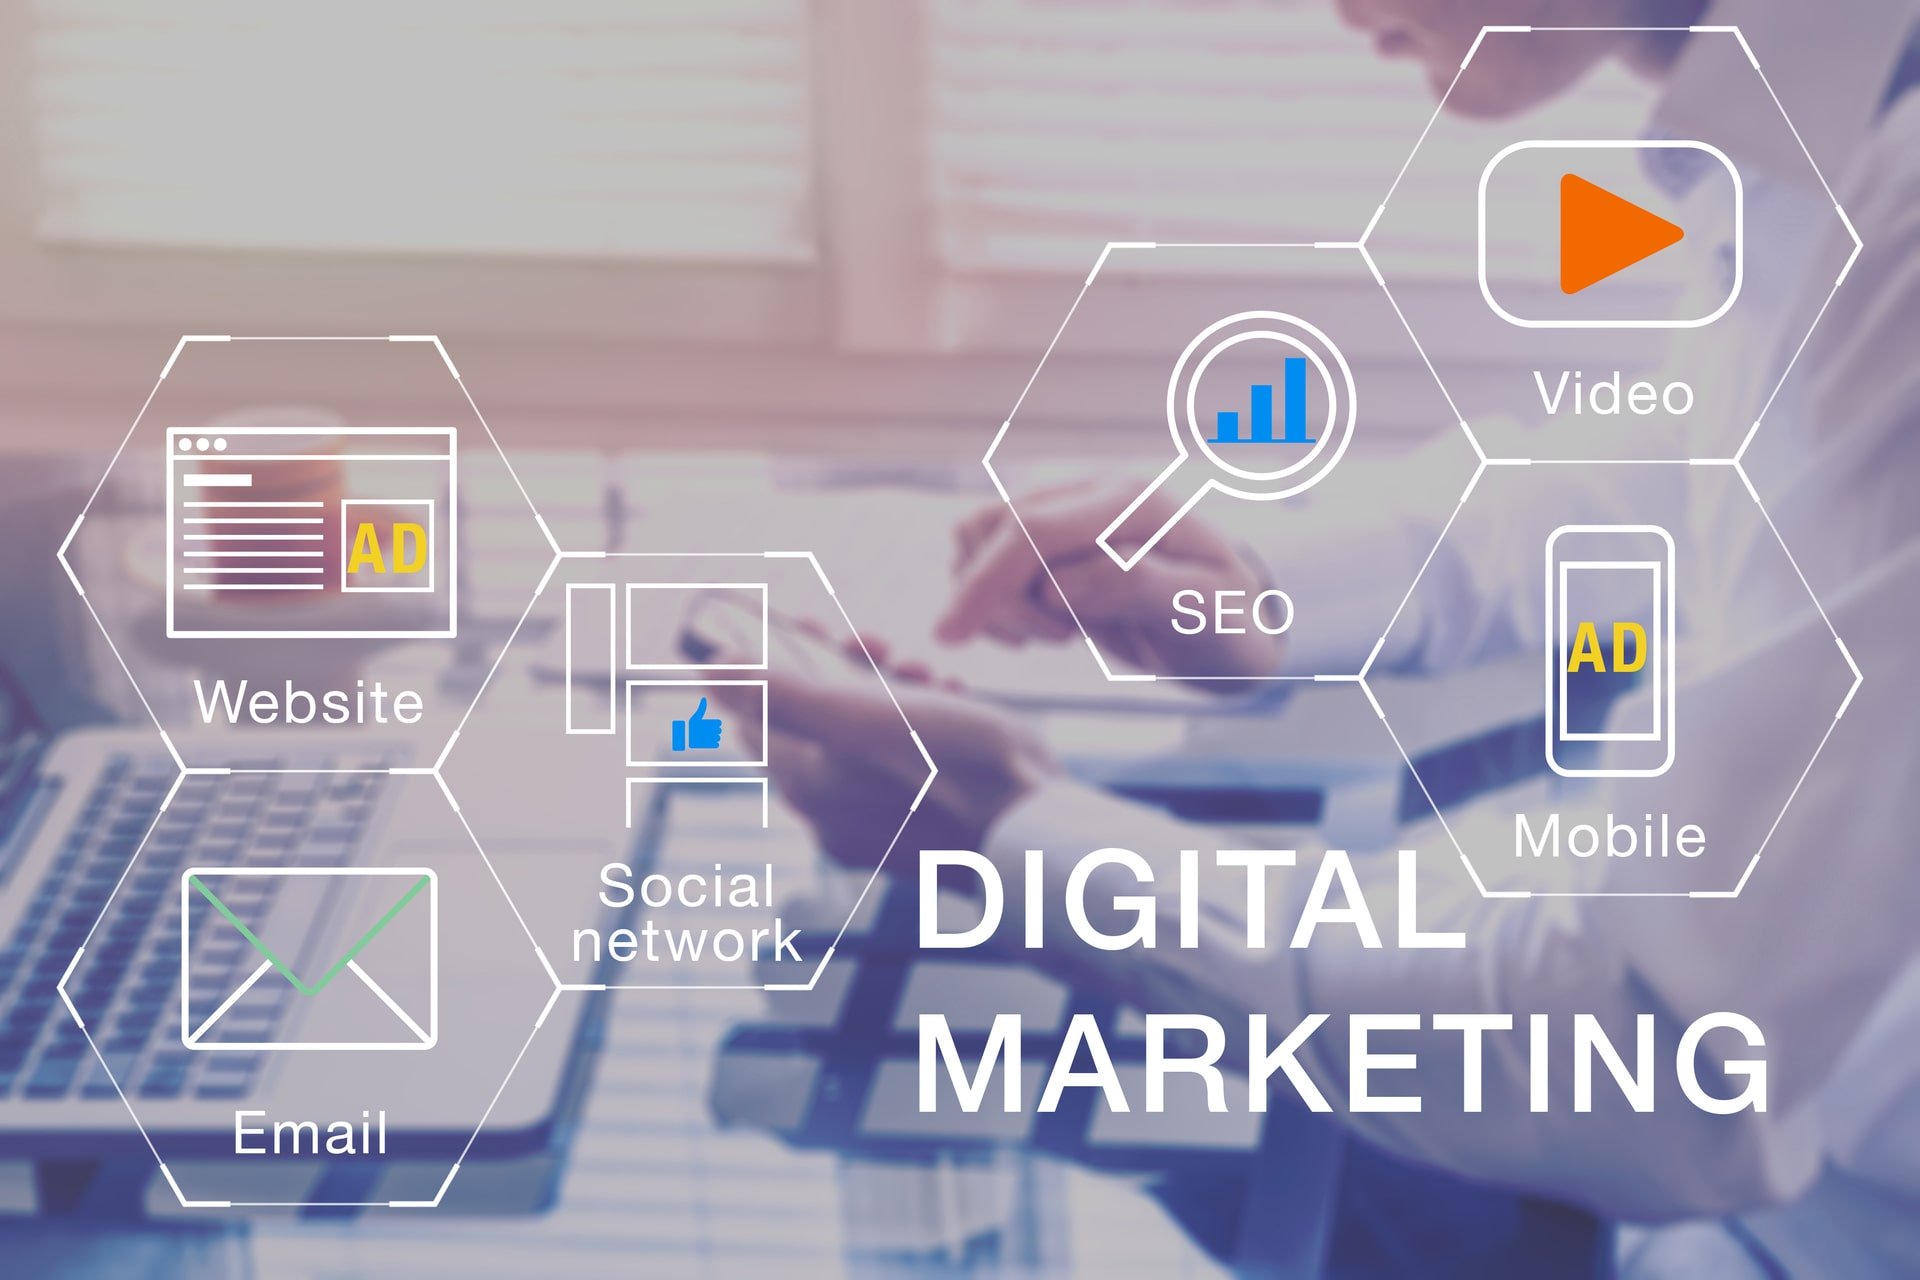 Digital marketing improves your business&apos;s online presence and increases traffic to your website